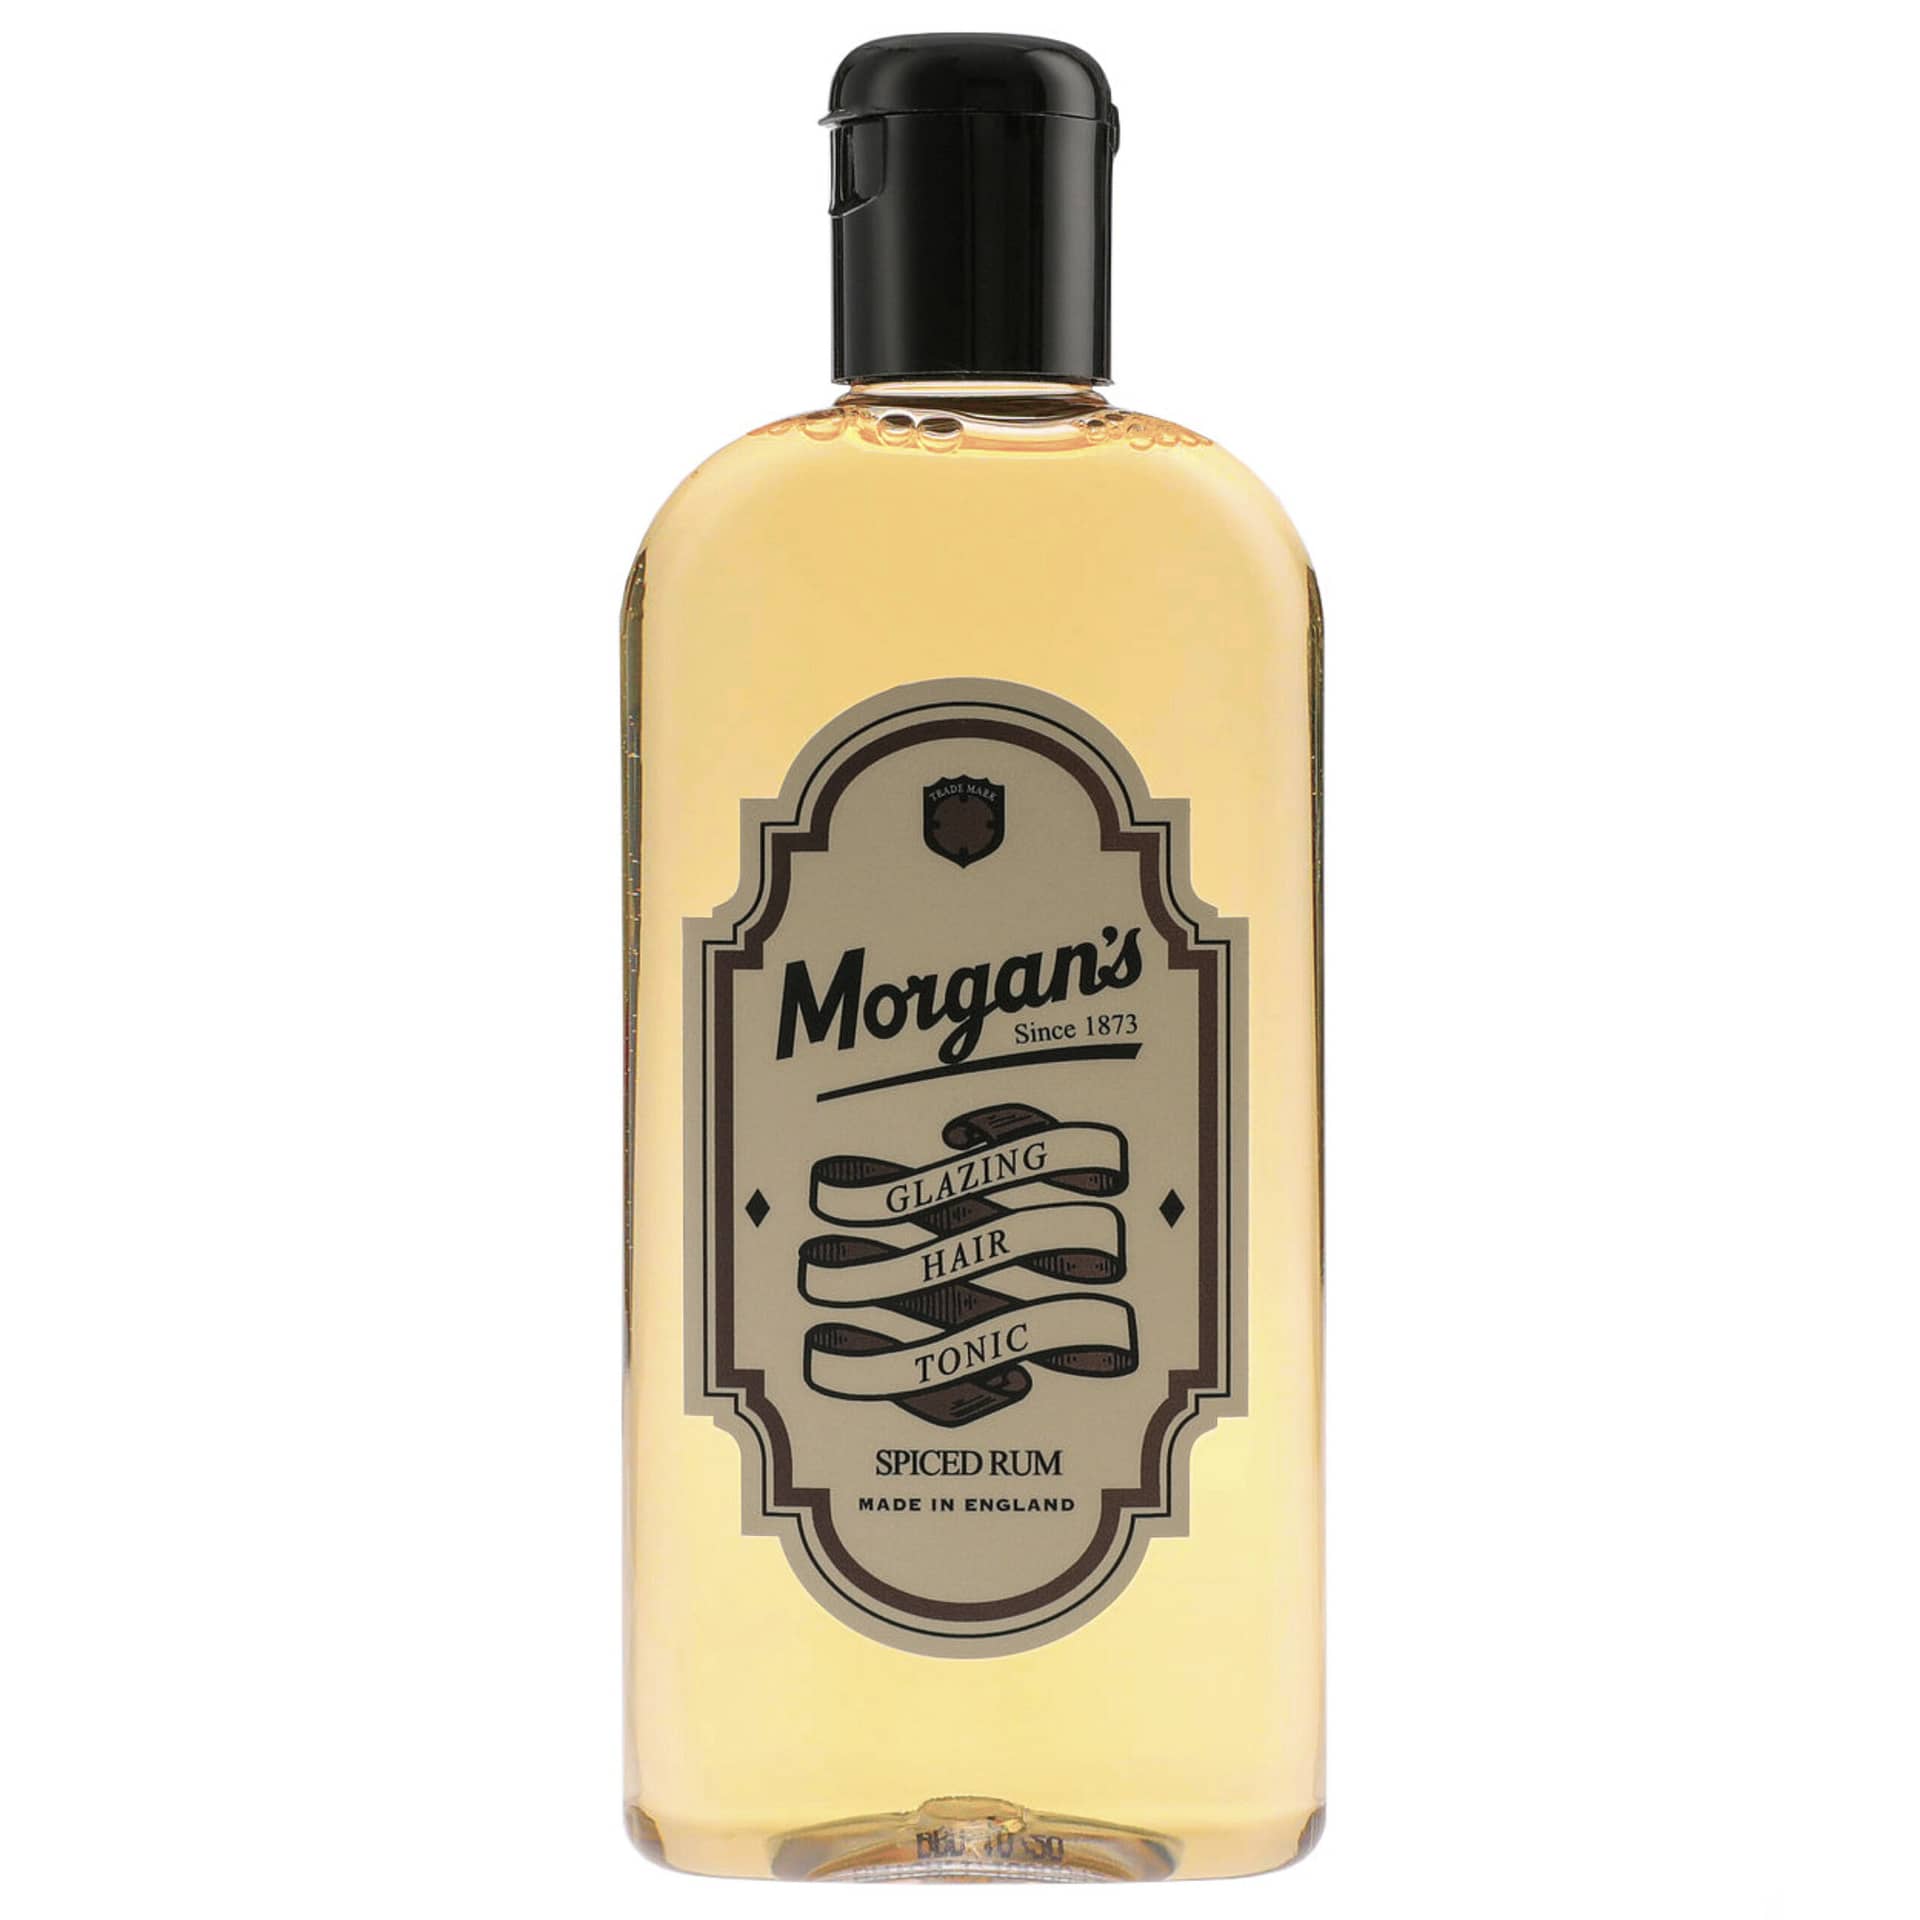 My Top 5 Picks For The Best Bay Rum Aftershave